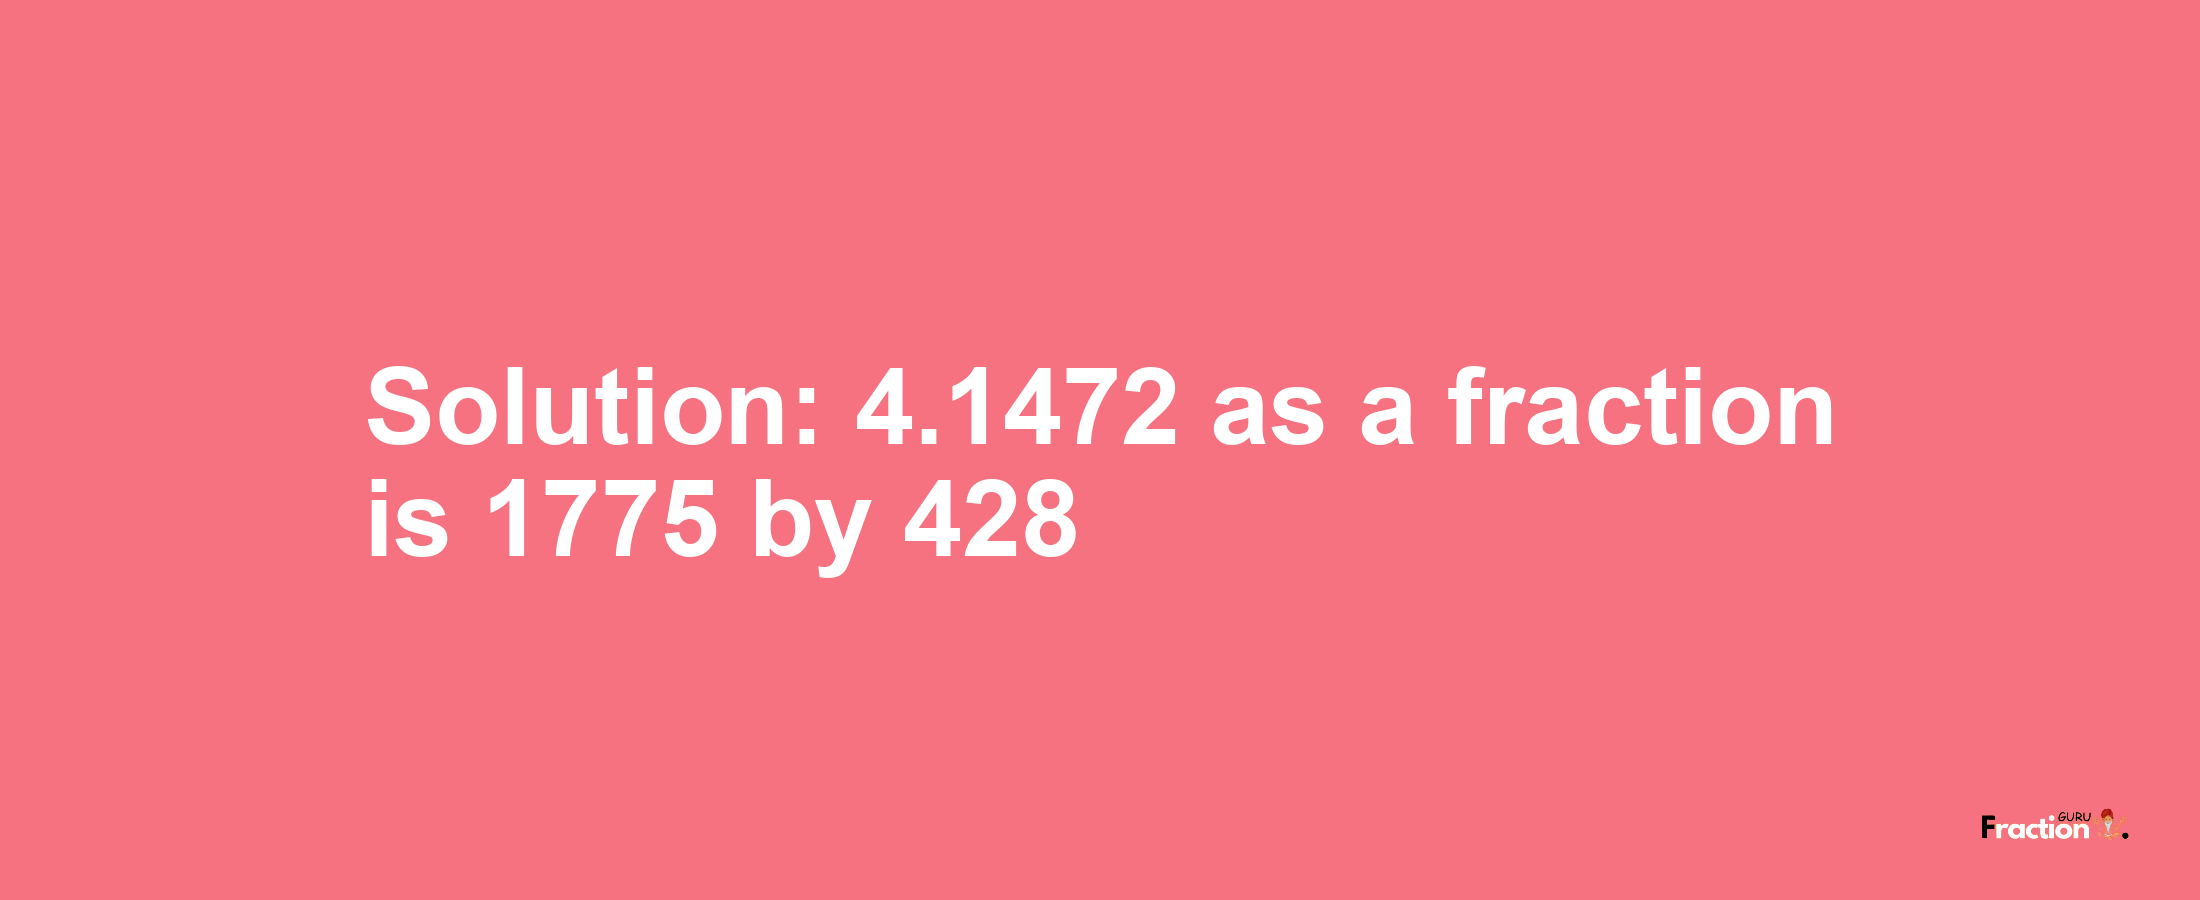 Solution:4.1472 as a fraction is 1775/428